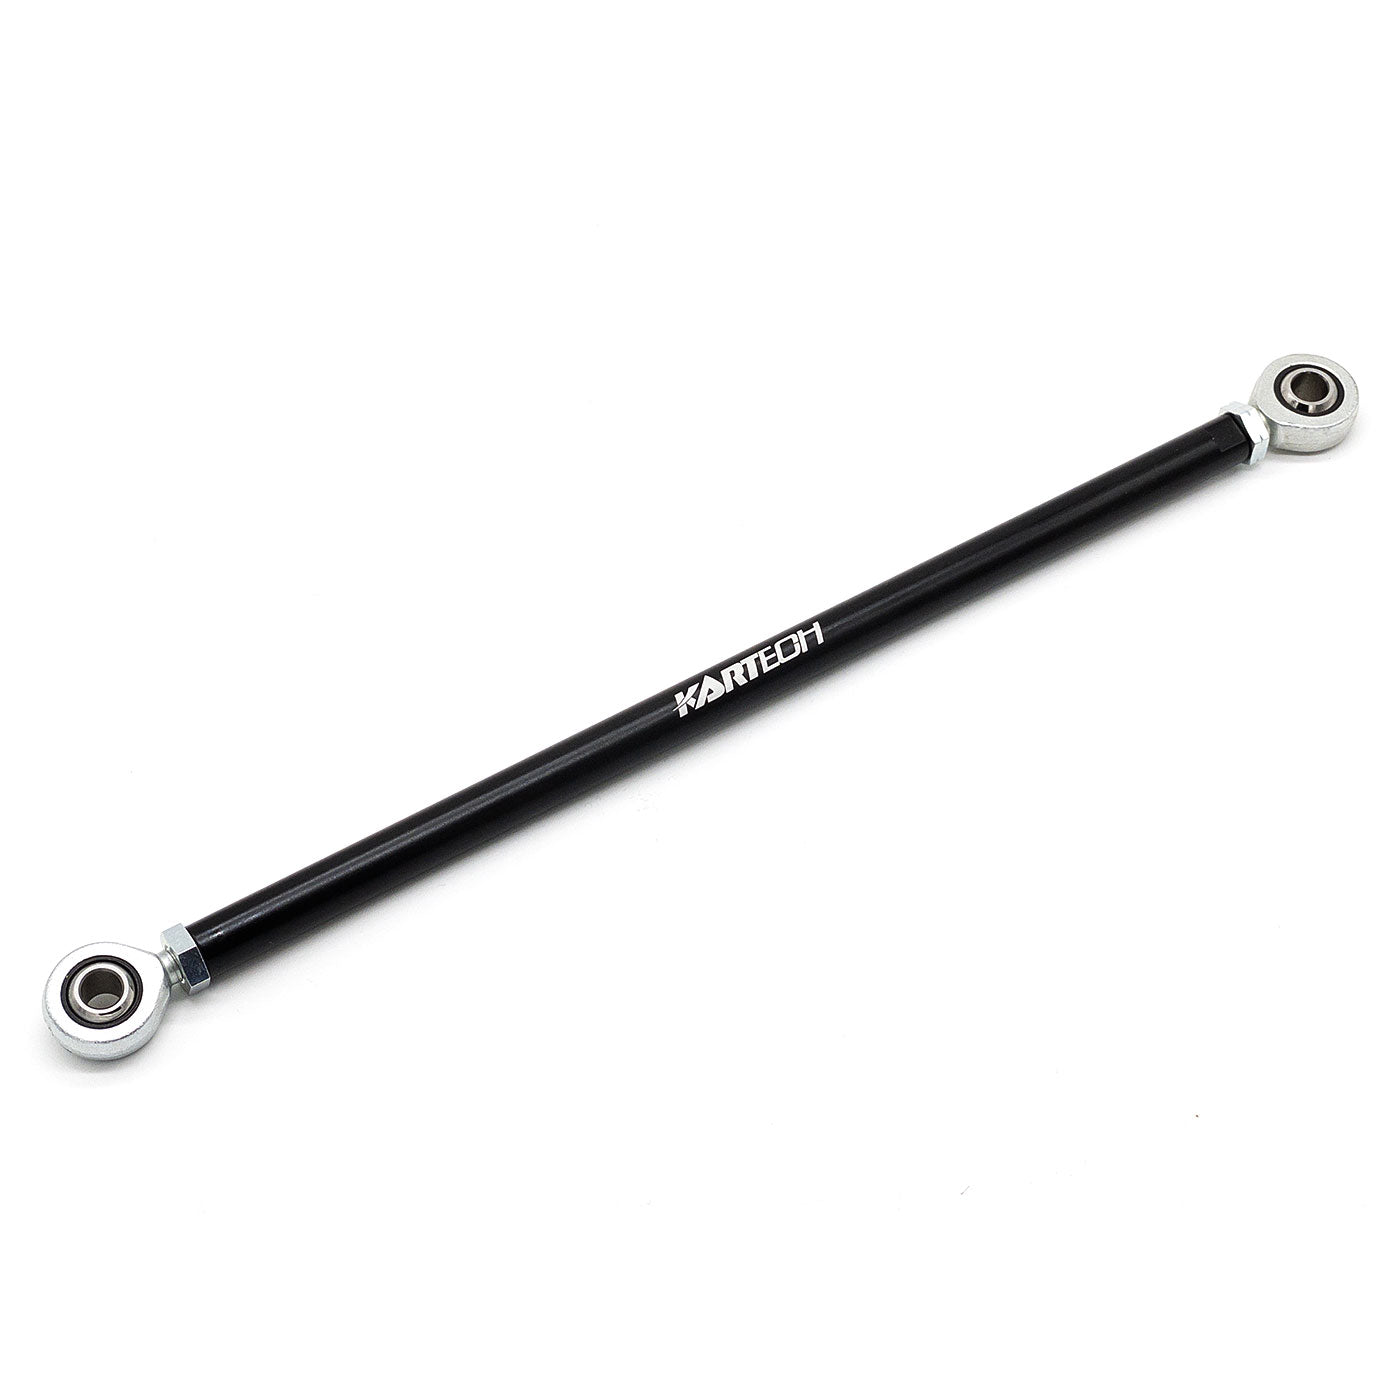 Complete tie rod for Arrow X5, X6.0 and X6.1 karts